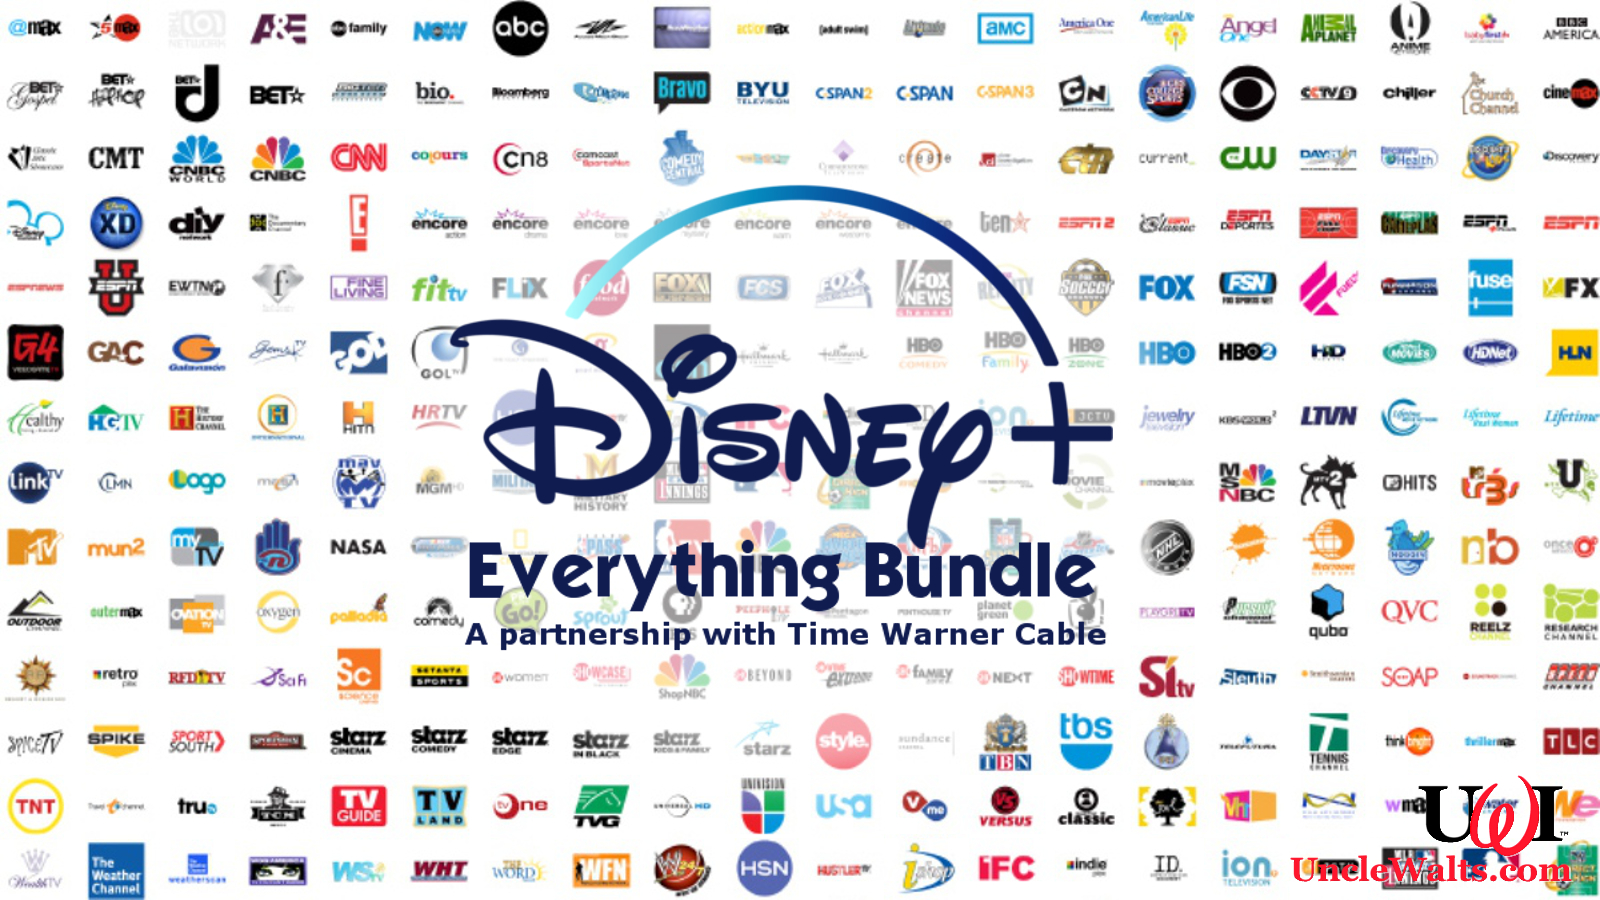 Disney+ announces cablebased "Everything Bundle" for 290/month